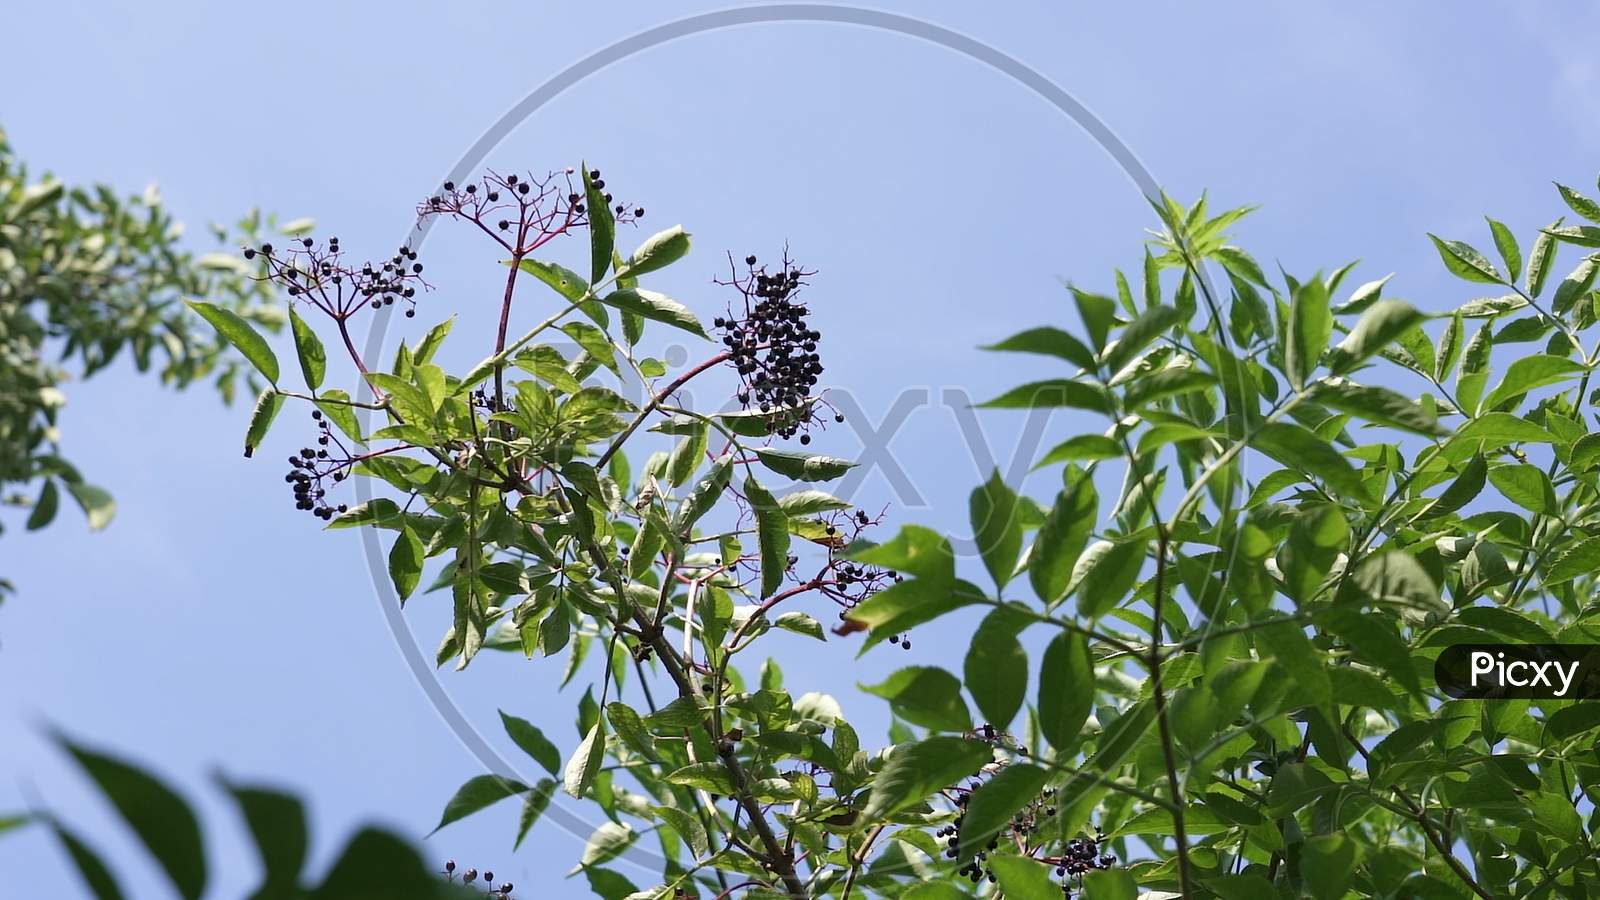 The Harvest Season Of Elderberries Depends On The Weather And When The Fruits Are Blue-Black